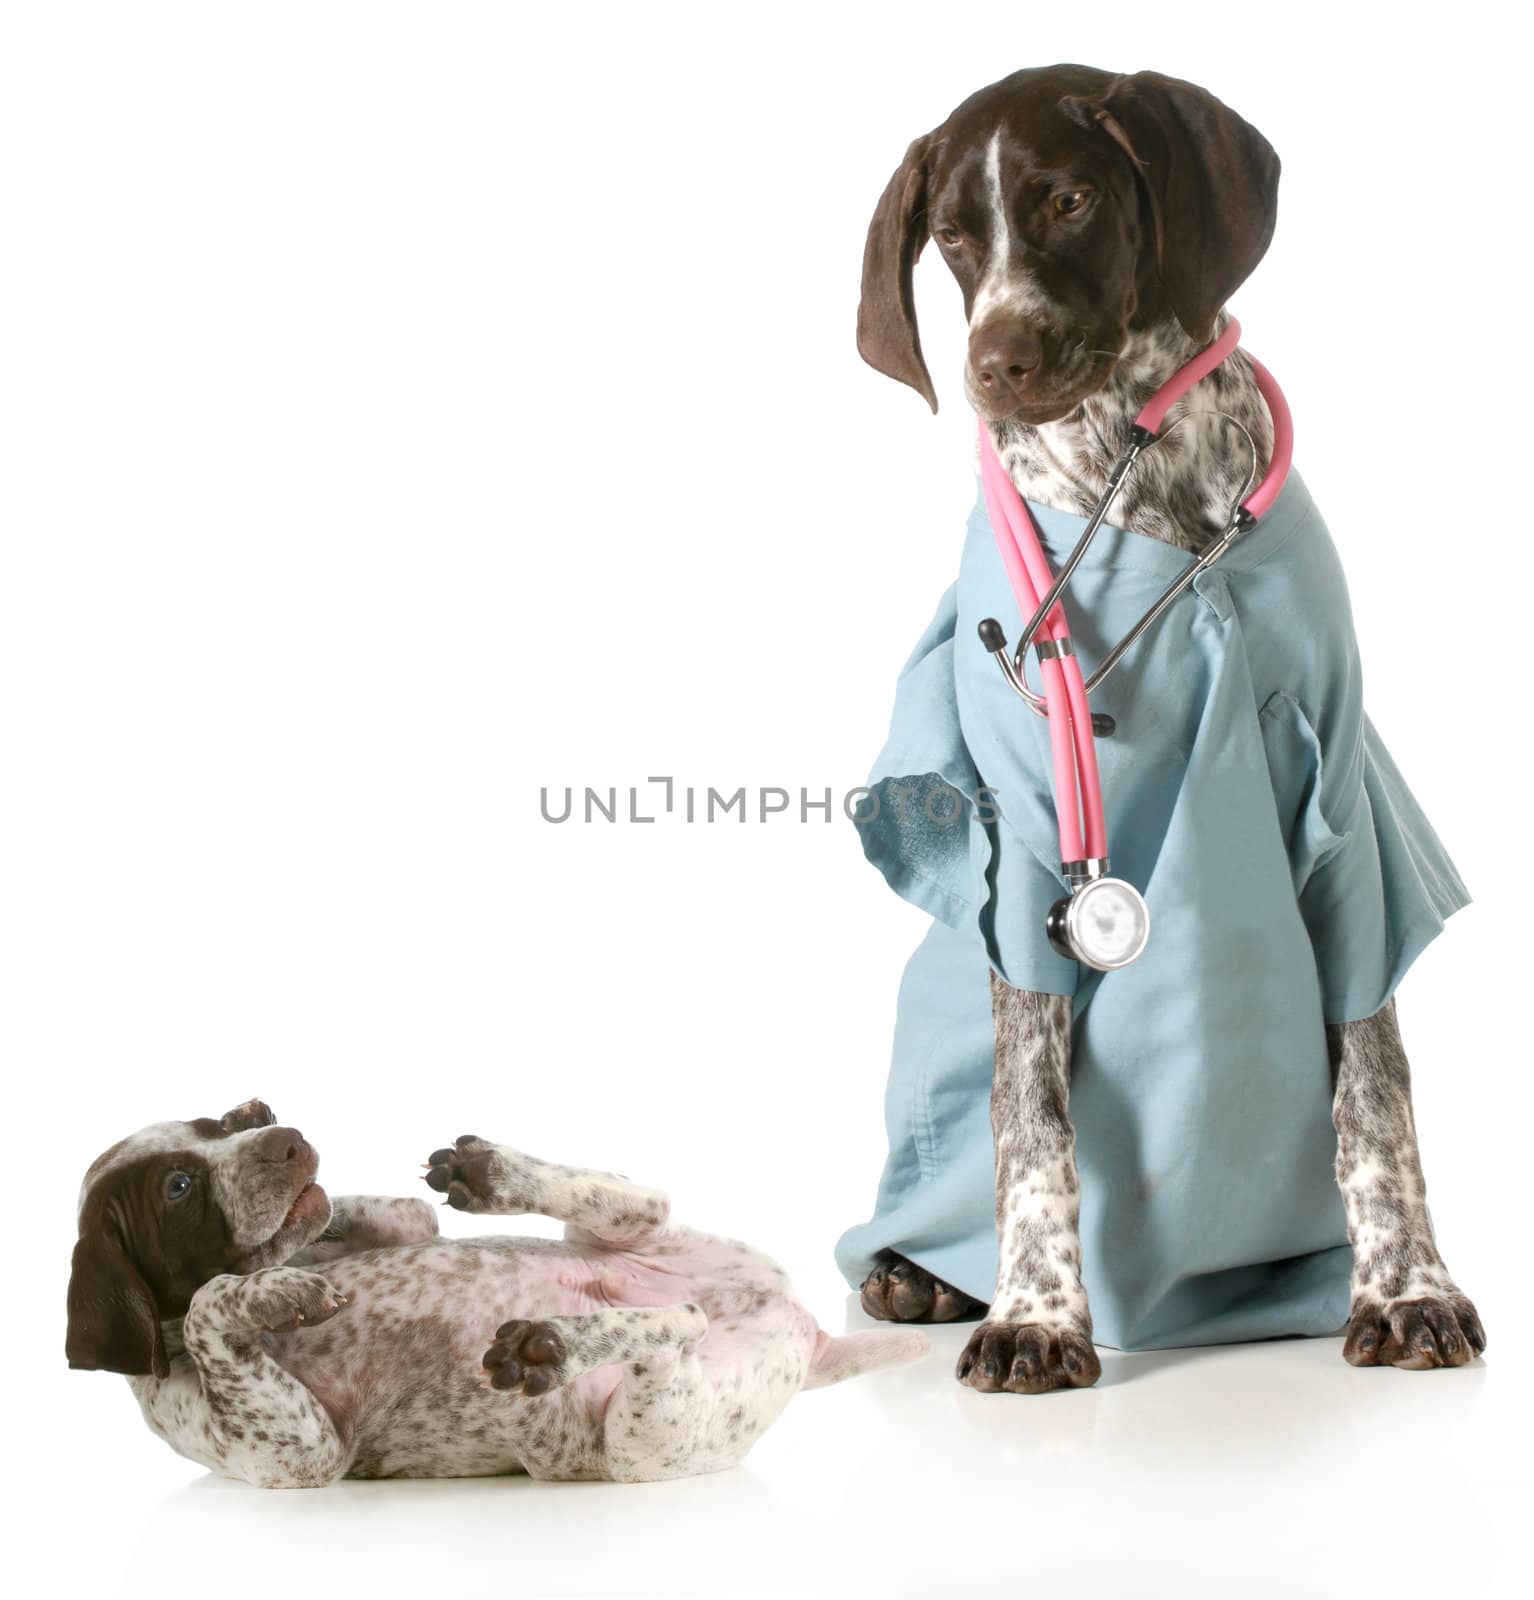 veterinary care - german shorthaired pointer dressed as a veterinarian looking after sick puppy isolated on white background